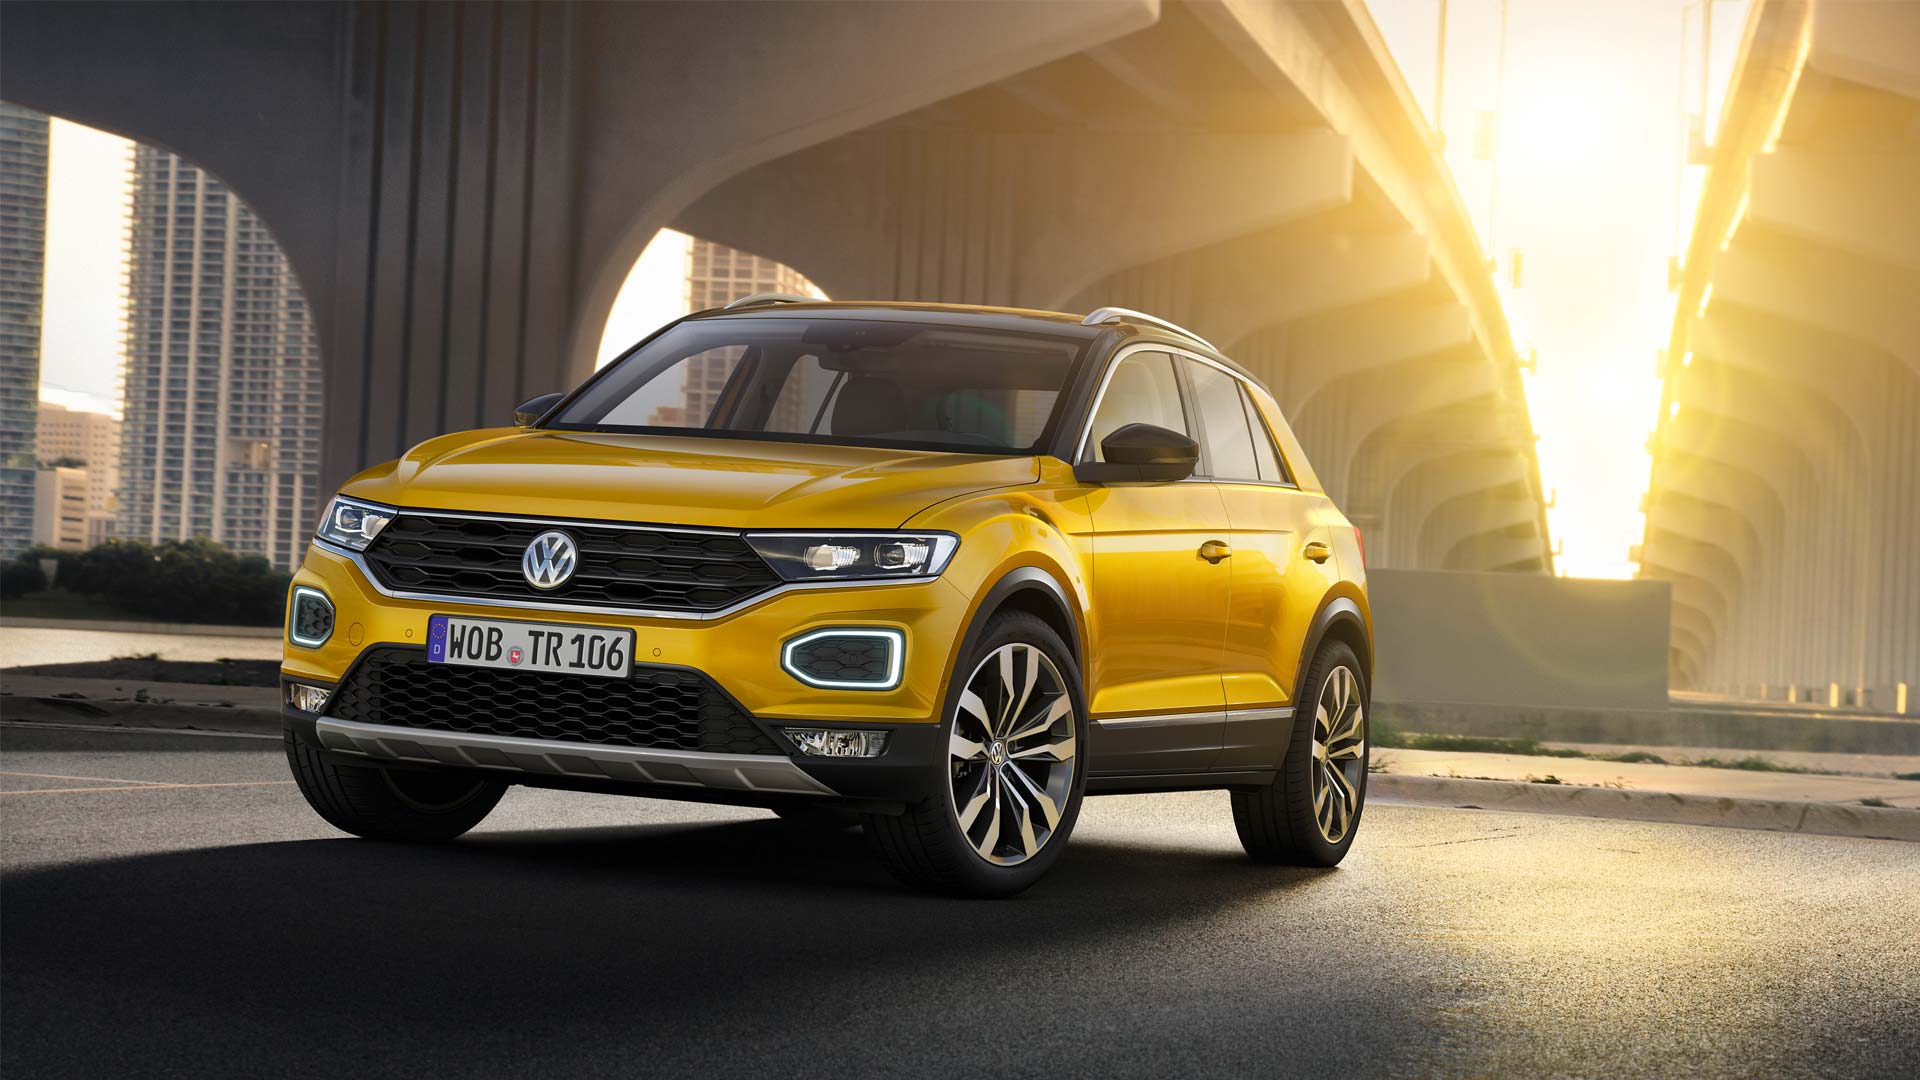 Volkswagen T Roc Ready To Rock The Compact World